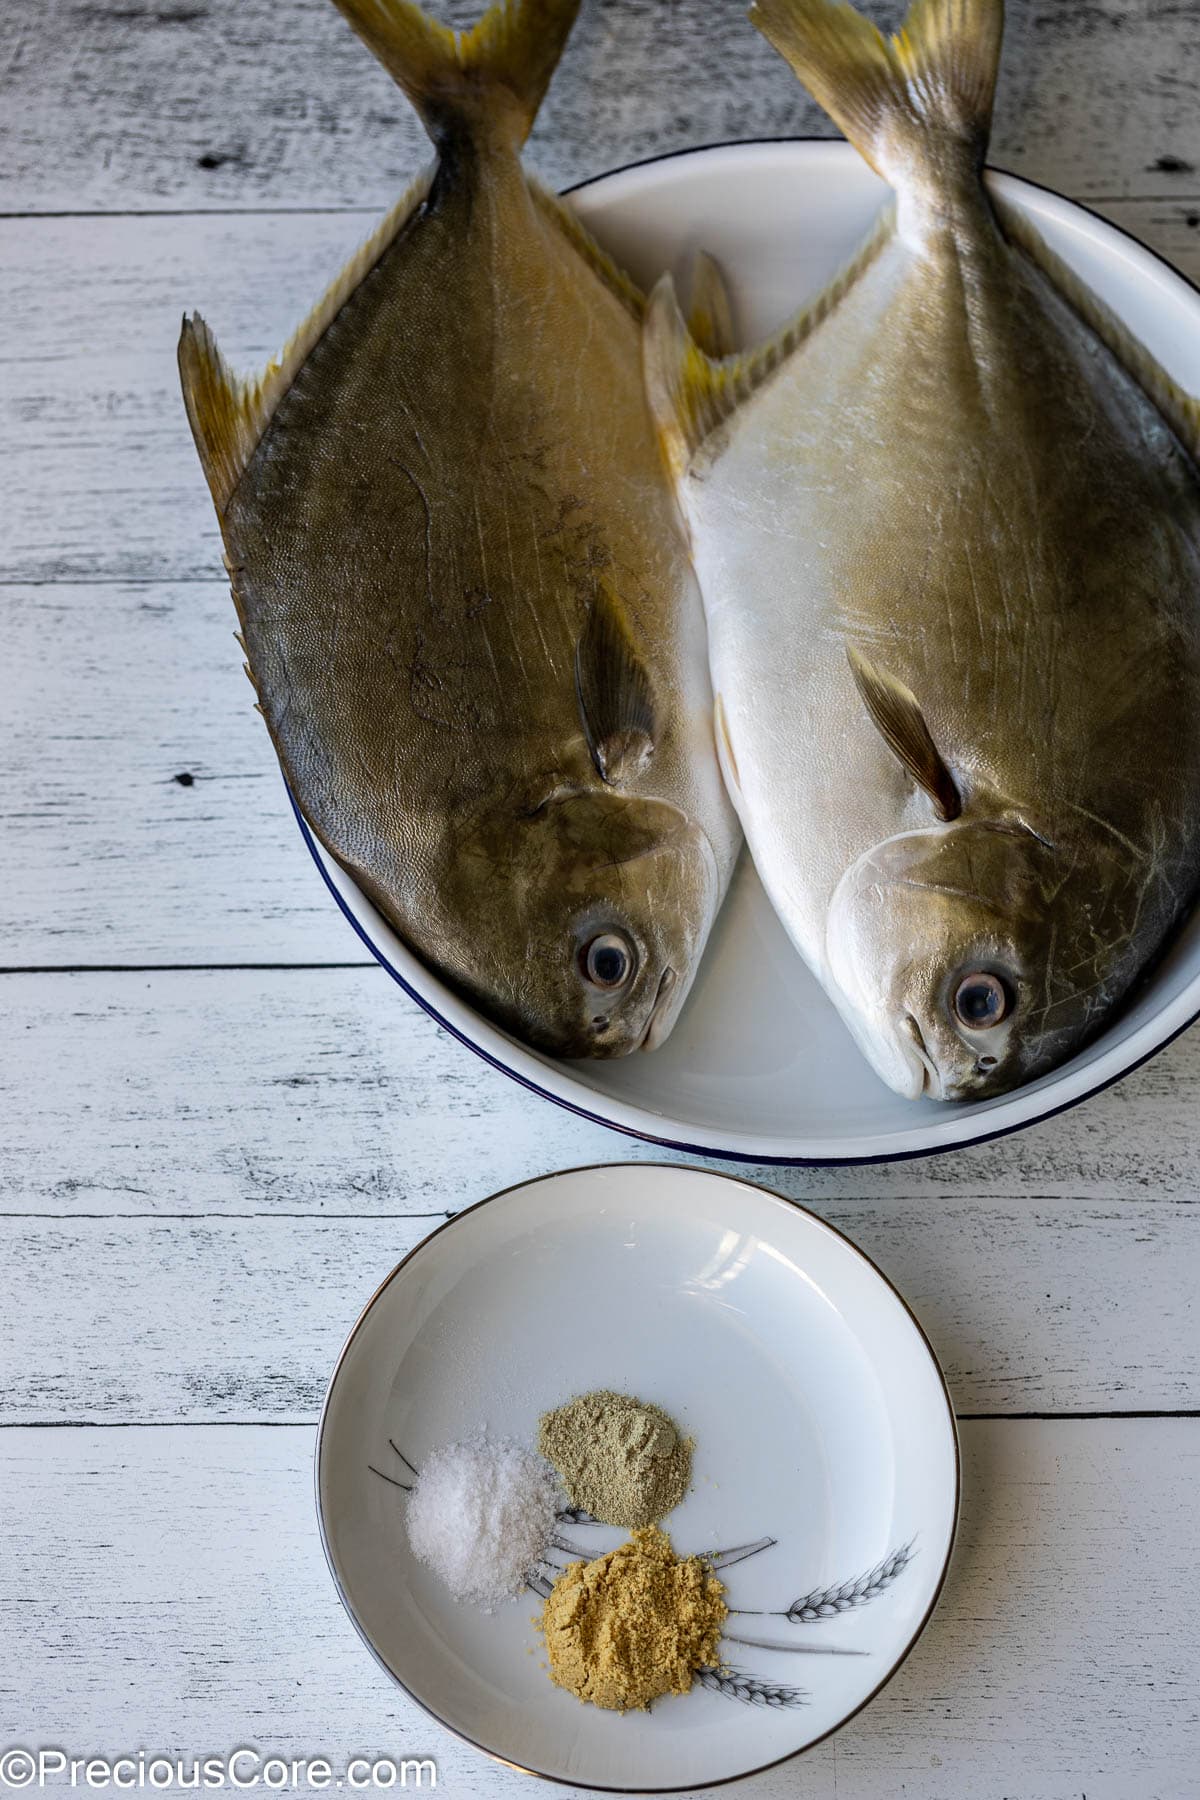 2 whole fish in a white bowl, a small plate with seasoning.